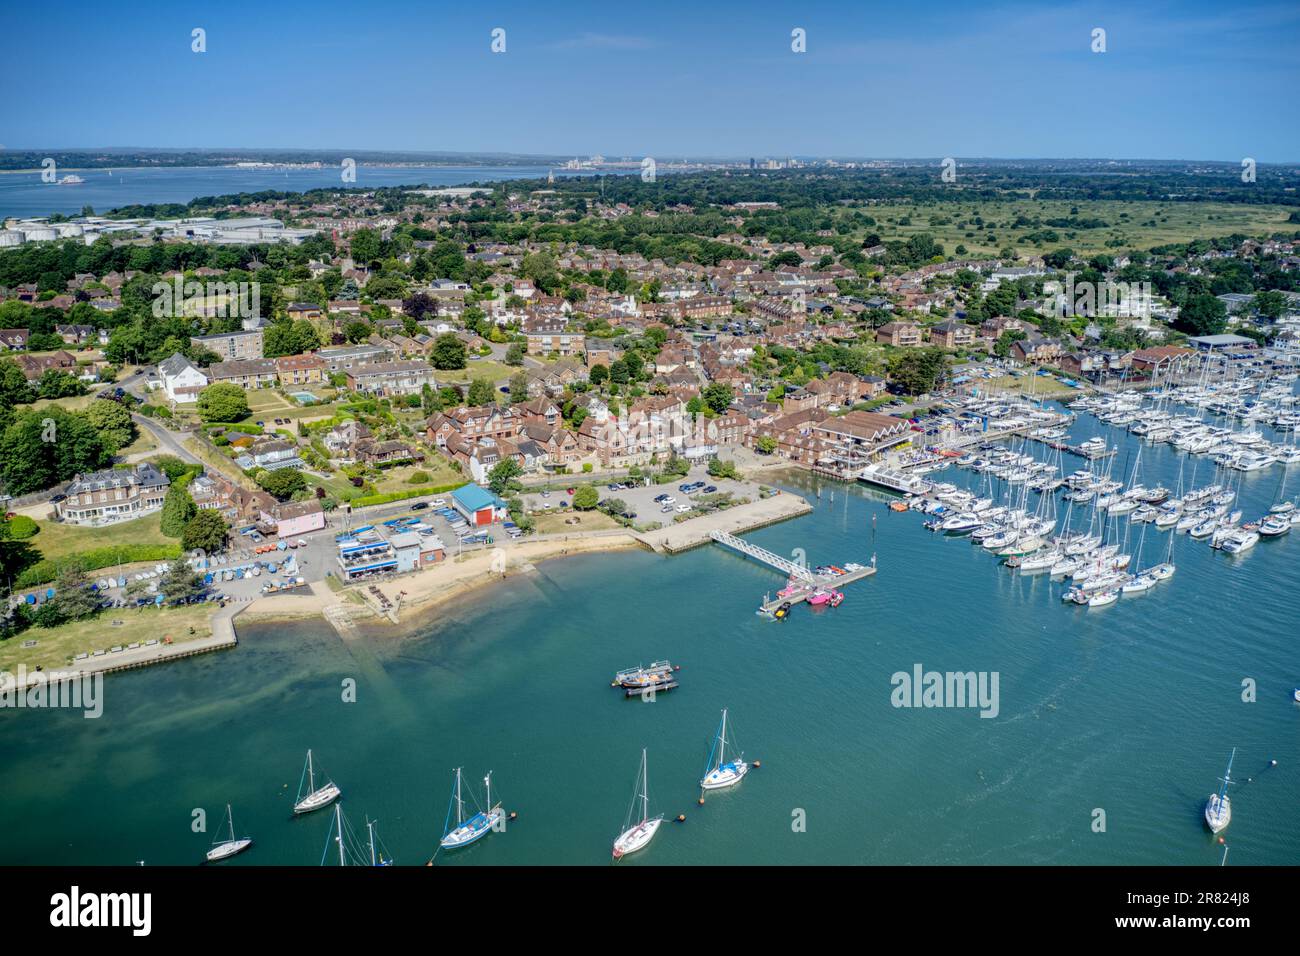 Hamble Le Rice known as Hamble Village on The Hamble River, a popular yachting destination with Port Hamble Marina full of Sailing Boats, Aerial view. Stock Photo